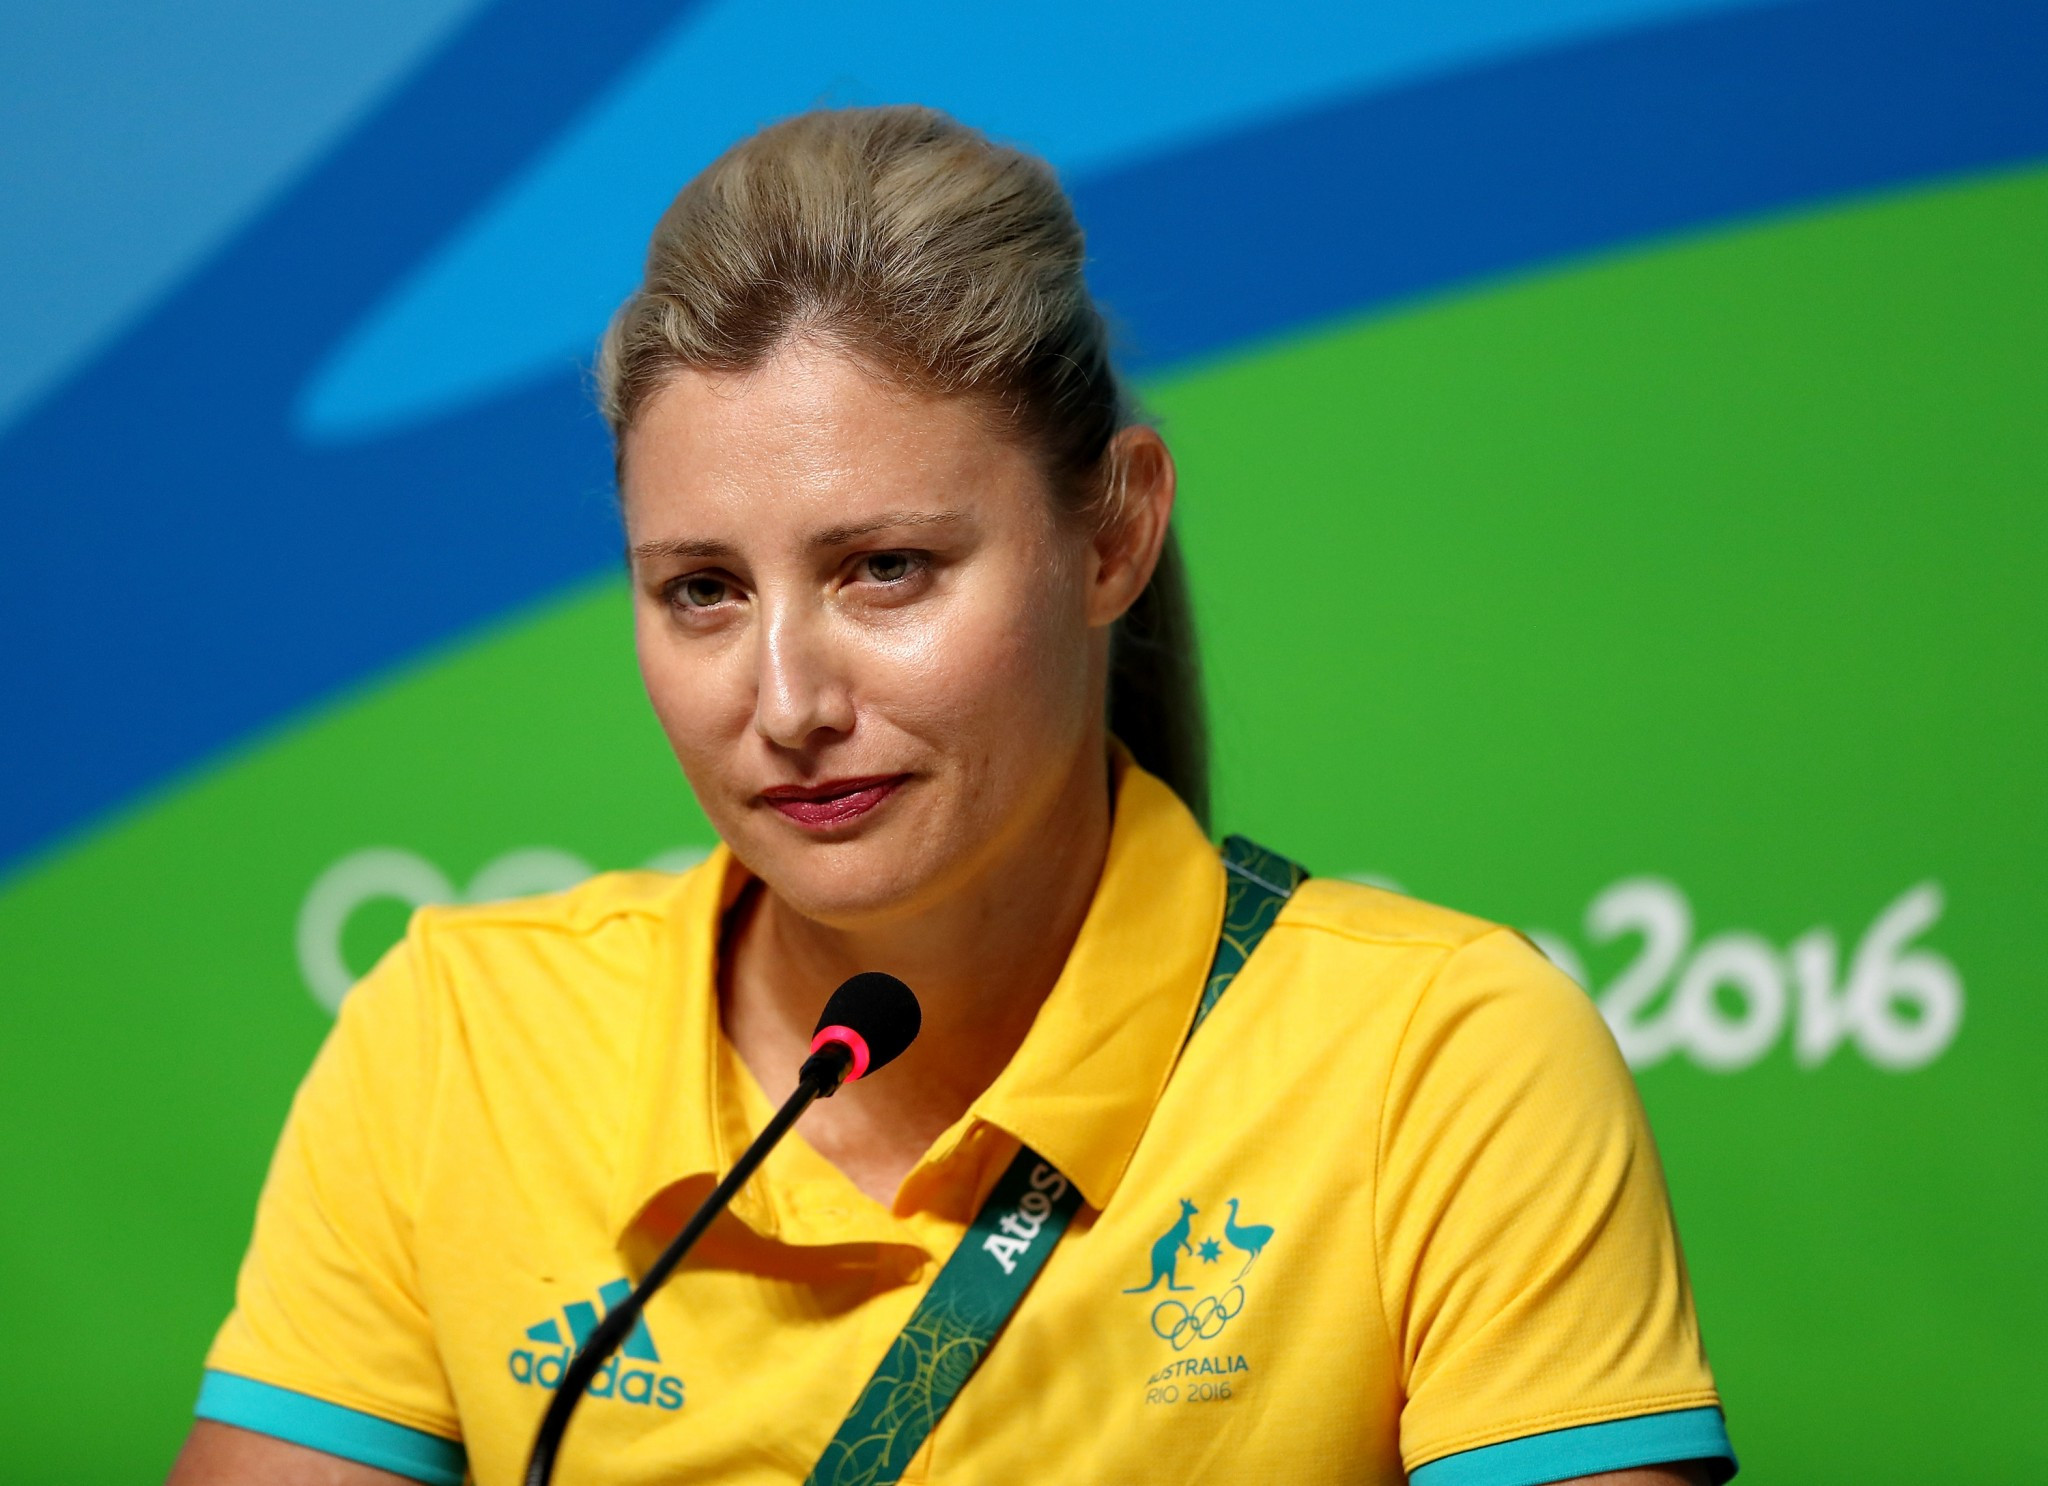 Australian Olympic Committee media director Mike Tancred had been given a severe reprimand after threatening to 